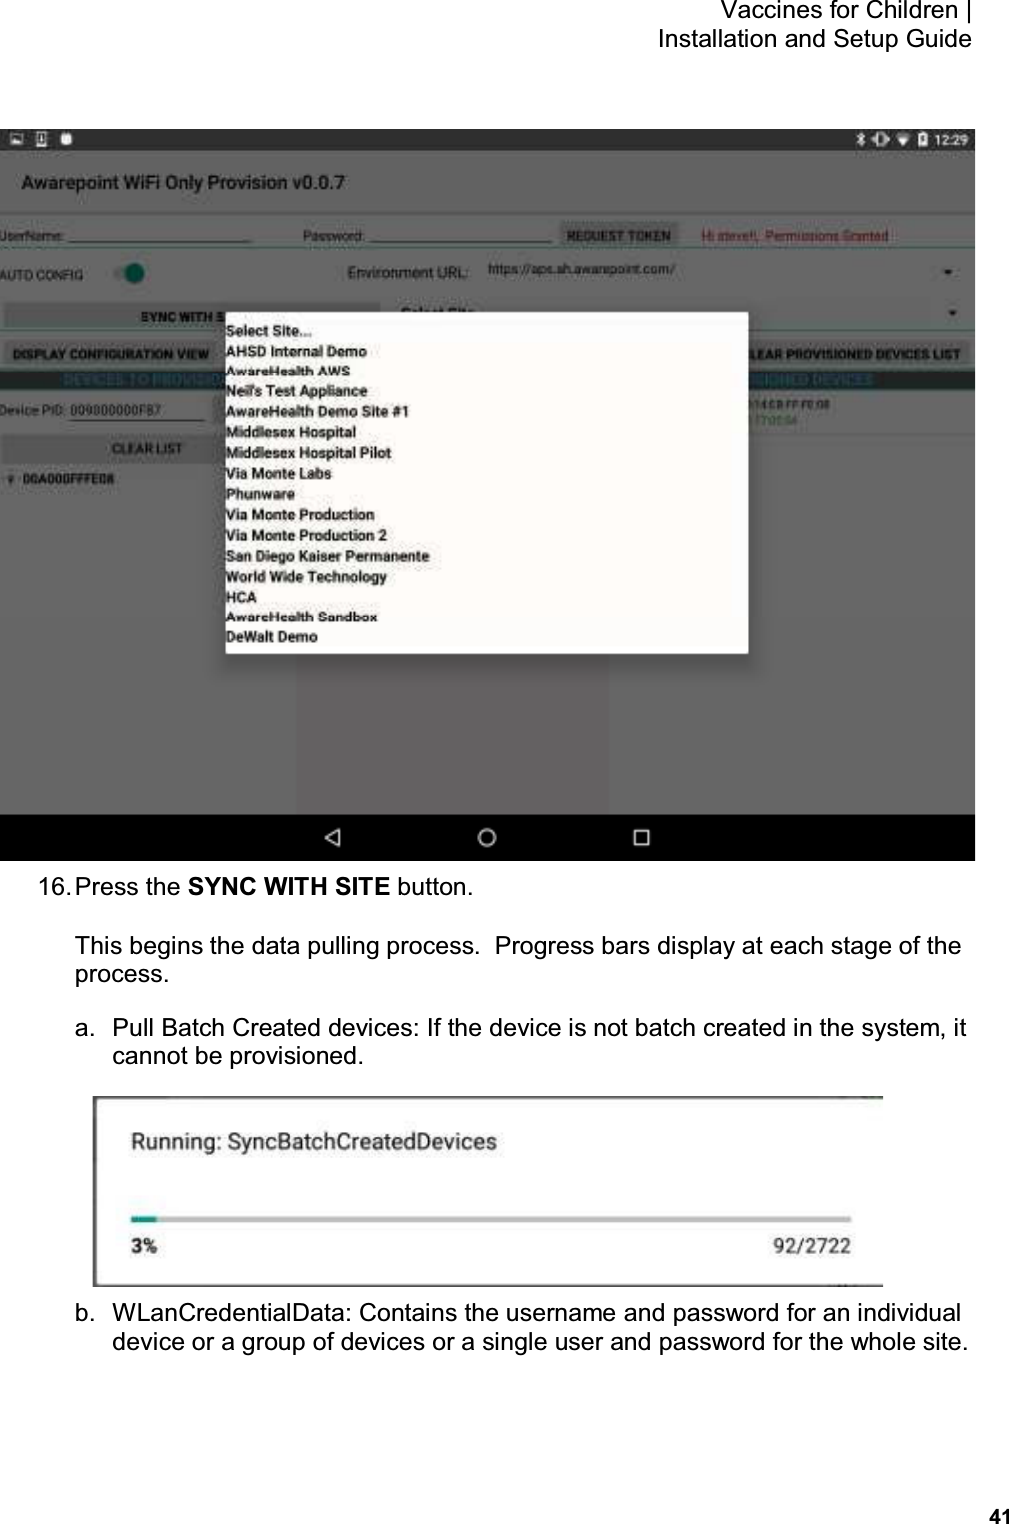           41 Vaccines for Children |  Installation and Setup Guide  16. Press the SYNC WITH SITE button. This begins the data pulling process.  Progress bars display at each stage of the process. a.  Pull Batch Created devices: If the device is not batch created in the system, it cannot be provisioned.  b.  WLanCredentialData: Contains the username and password for an individual device or a group of devices or a single user and password for the whole site. 